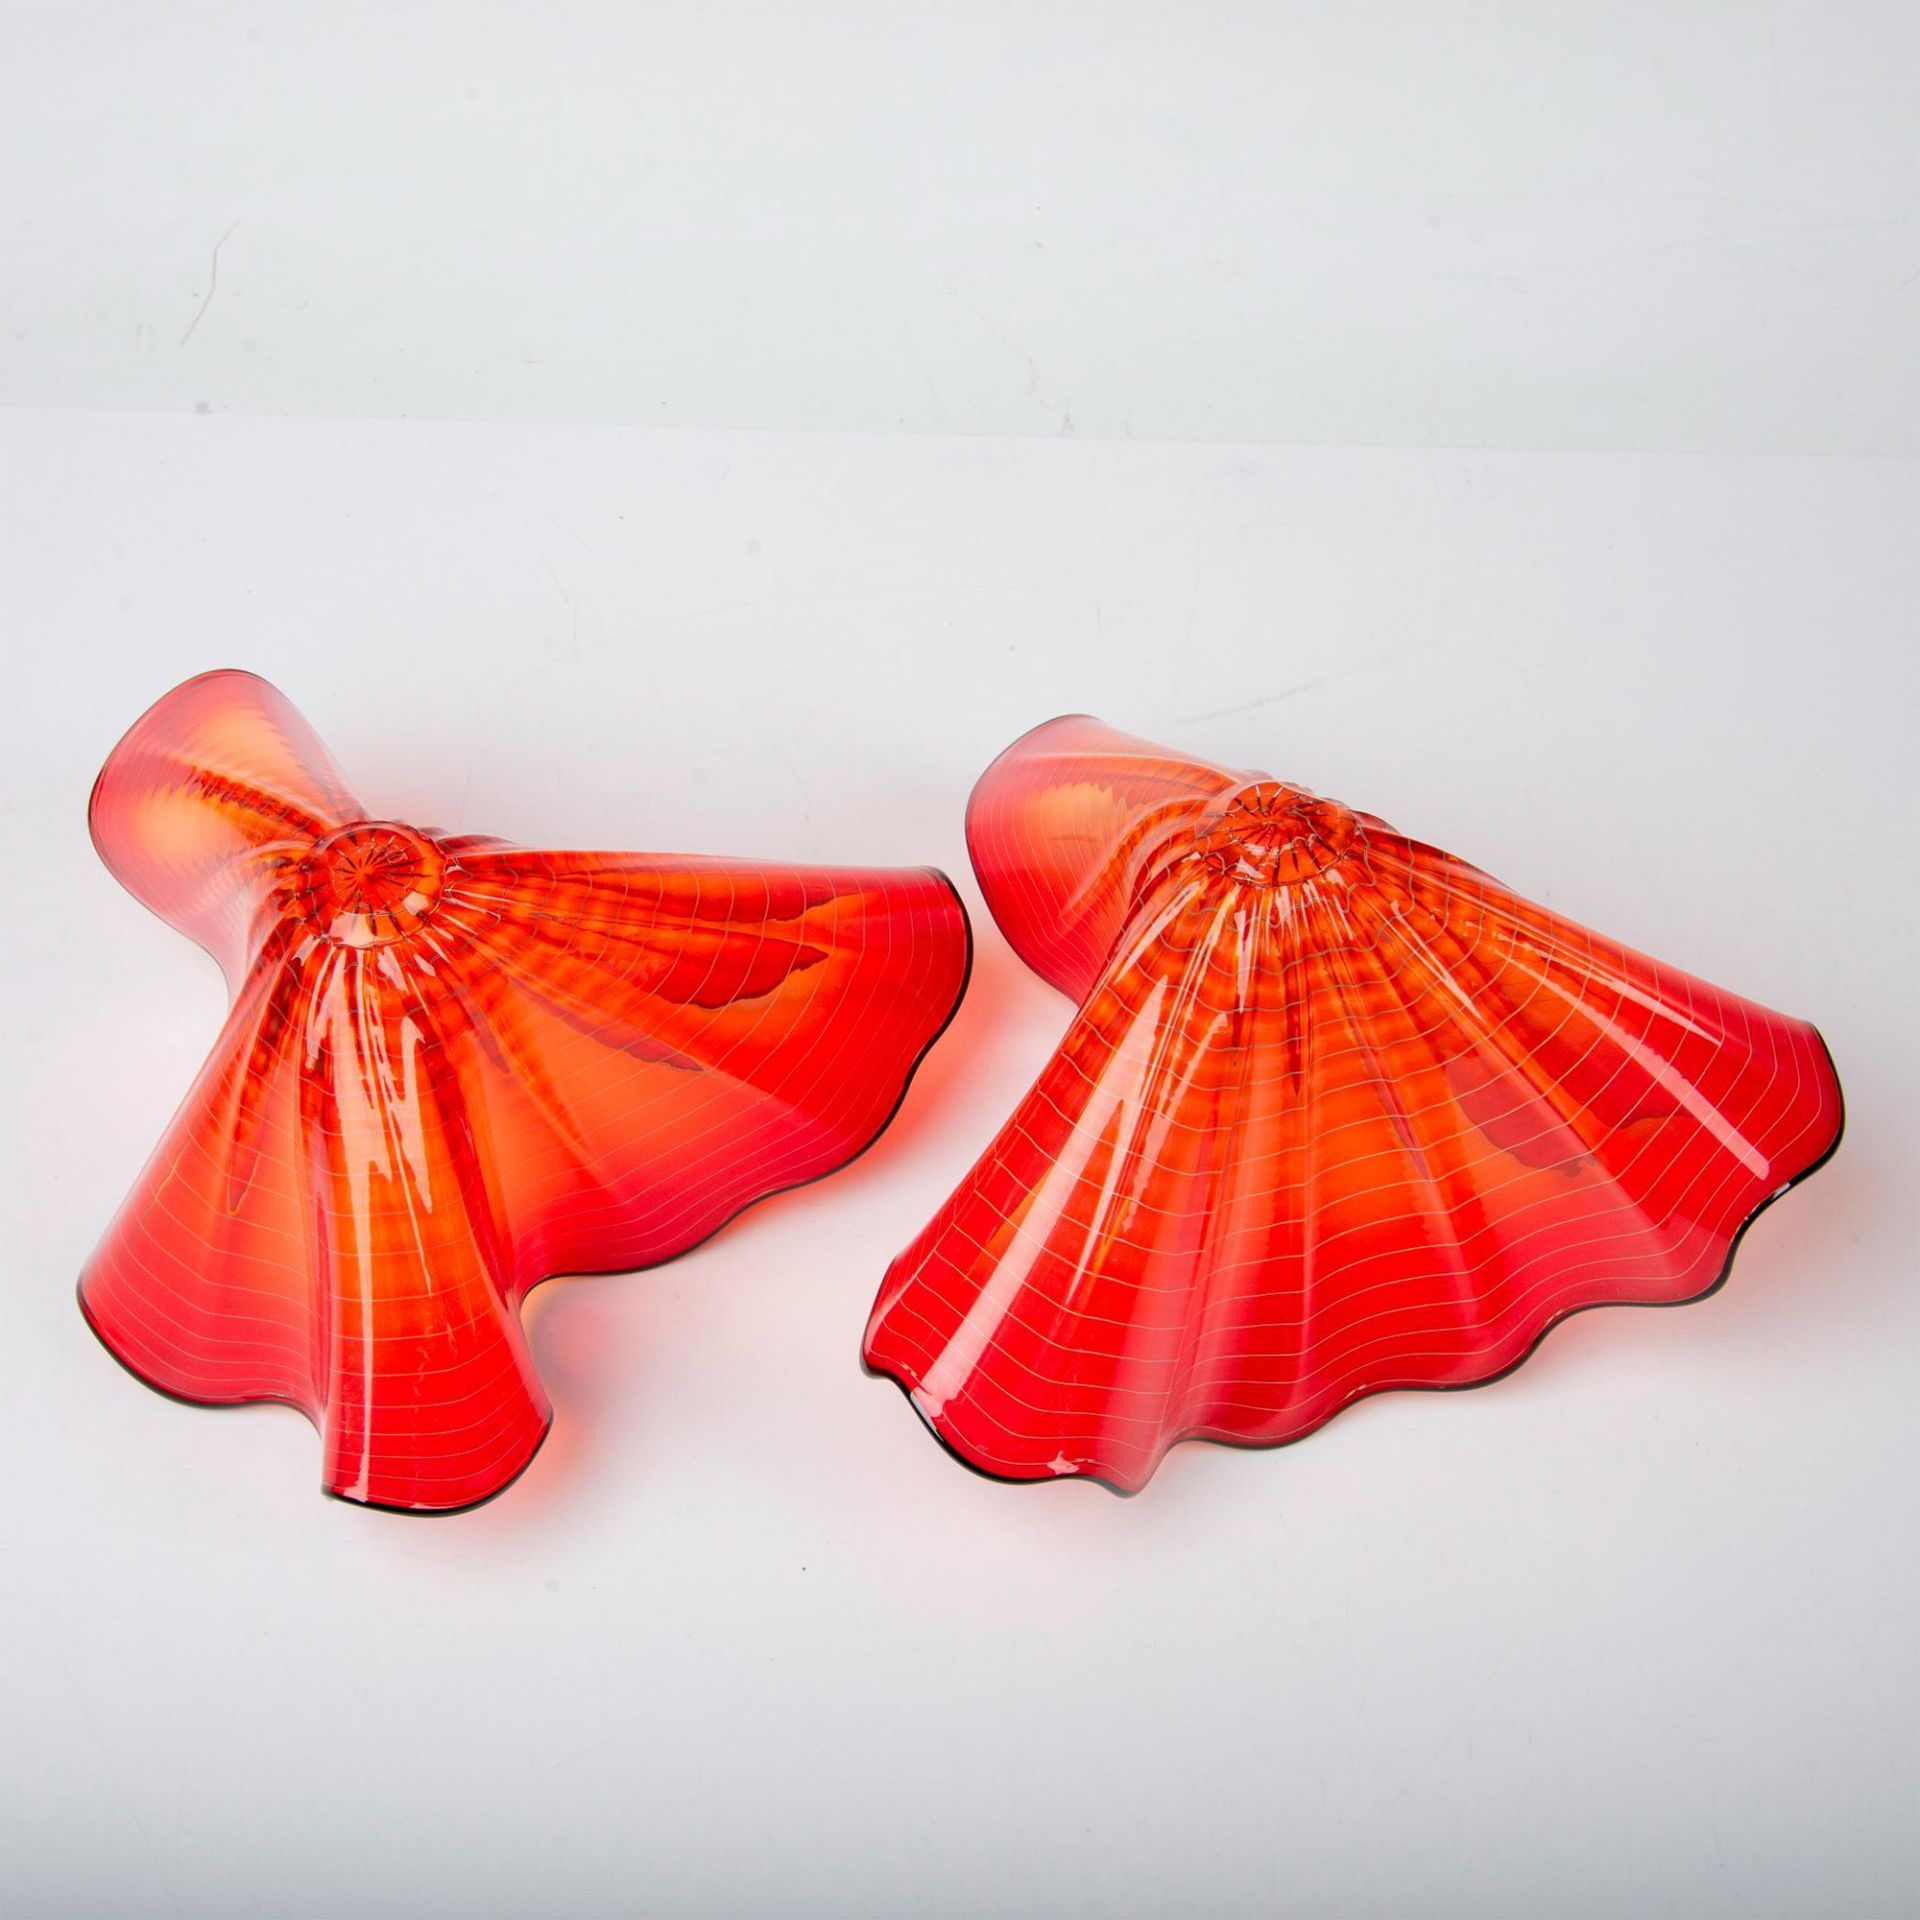 Dale Chihuly Portland Press Art Glass, Red Amber Persian Pair - Image 11 of 20